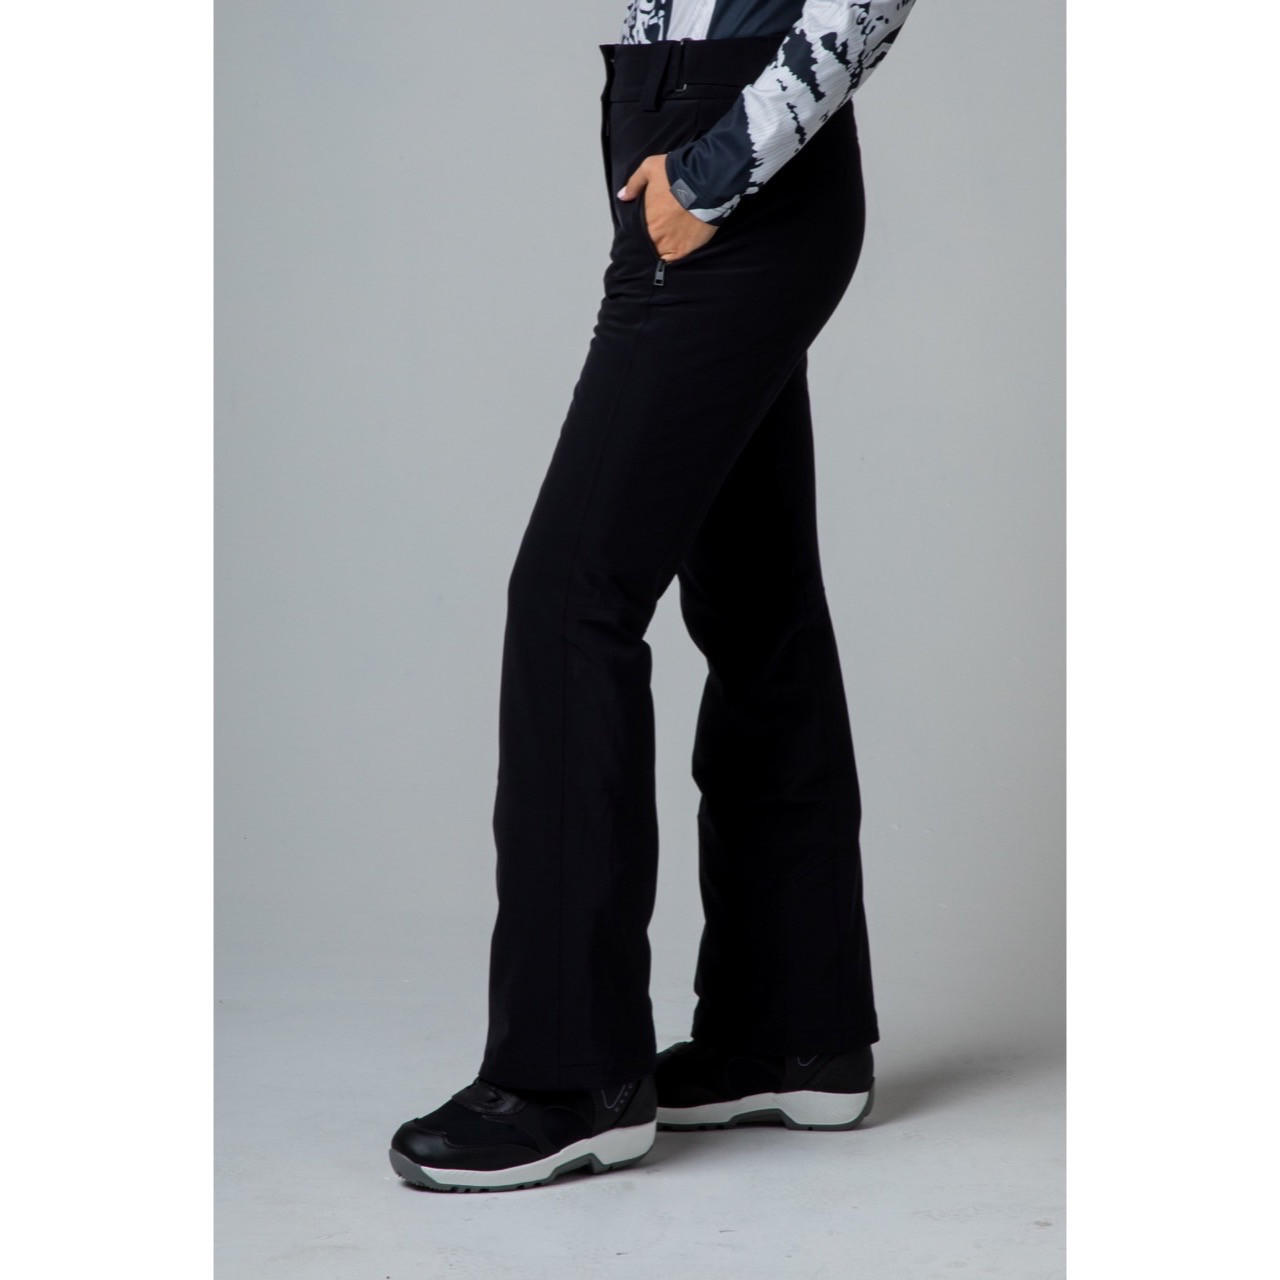 The North Face Apex STH Pants, Women's Fashion, Bottoms, Other